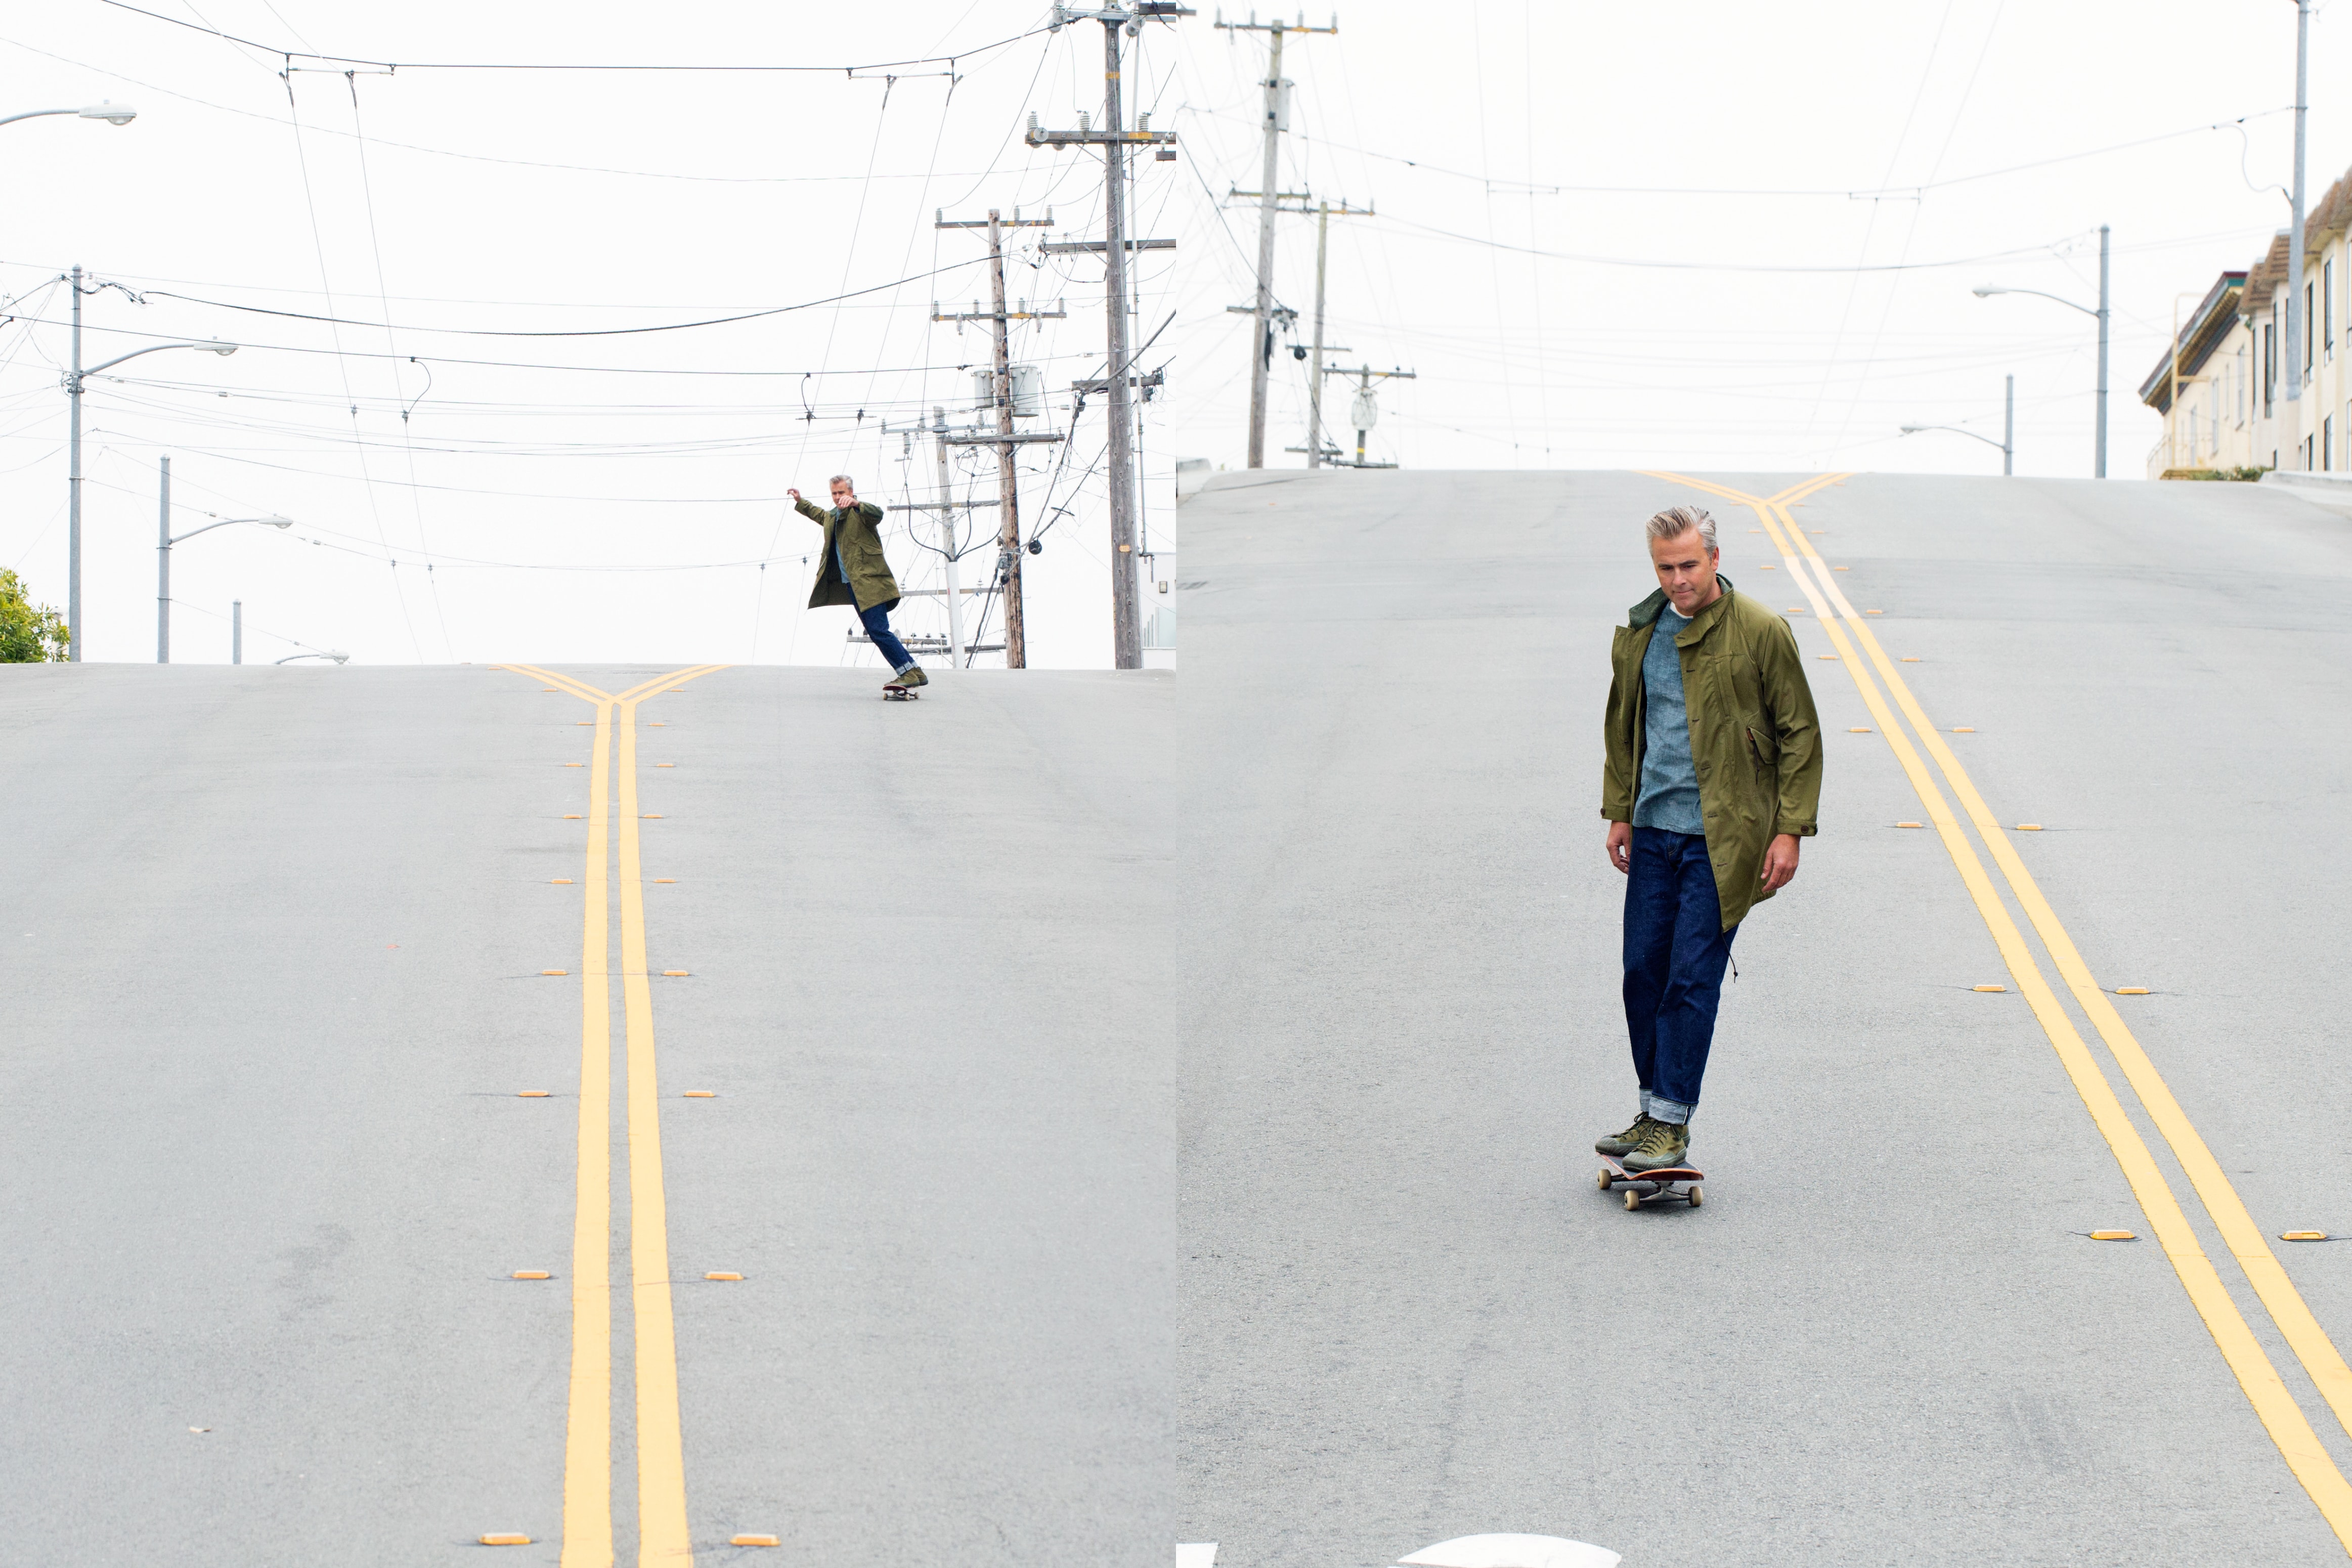 The Hill Side x Unionmade San Francisco Lookbook Skateboarding jackets plaid 2016 slopped pavement